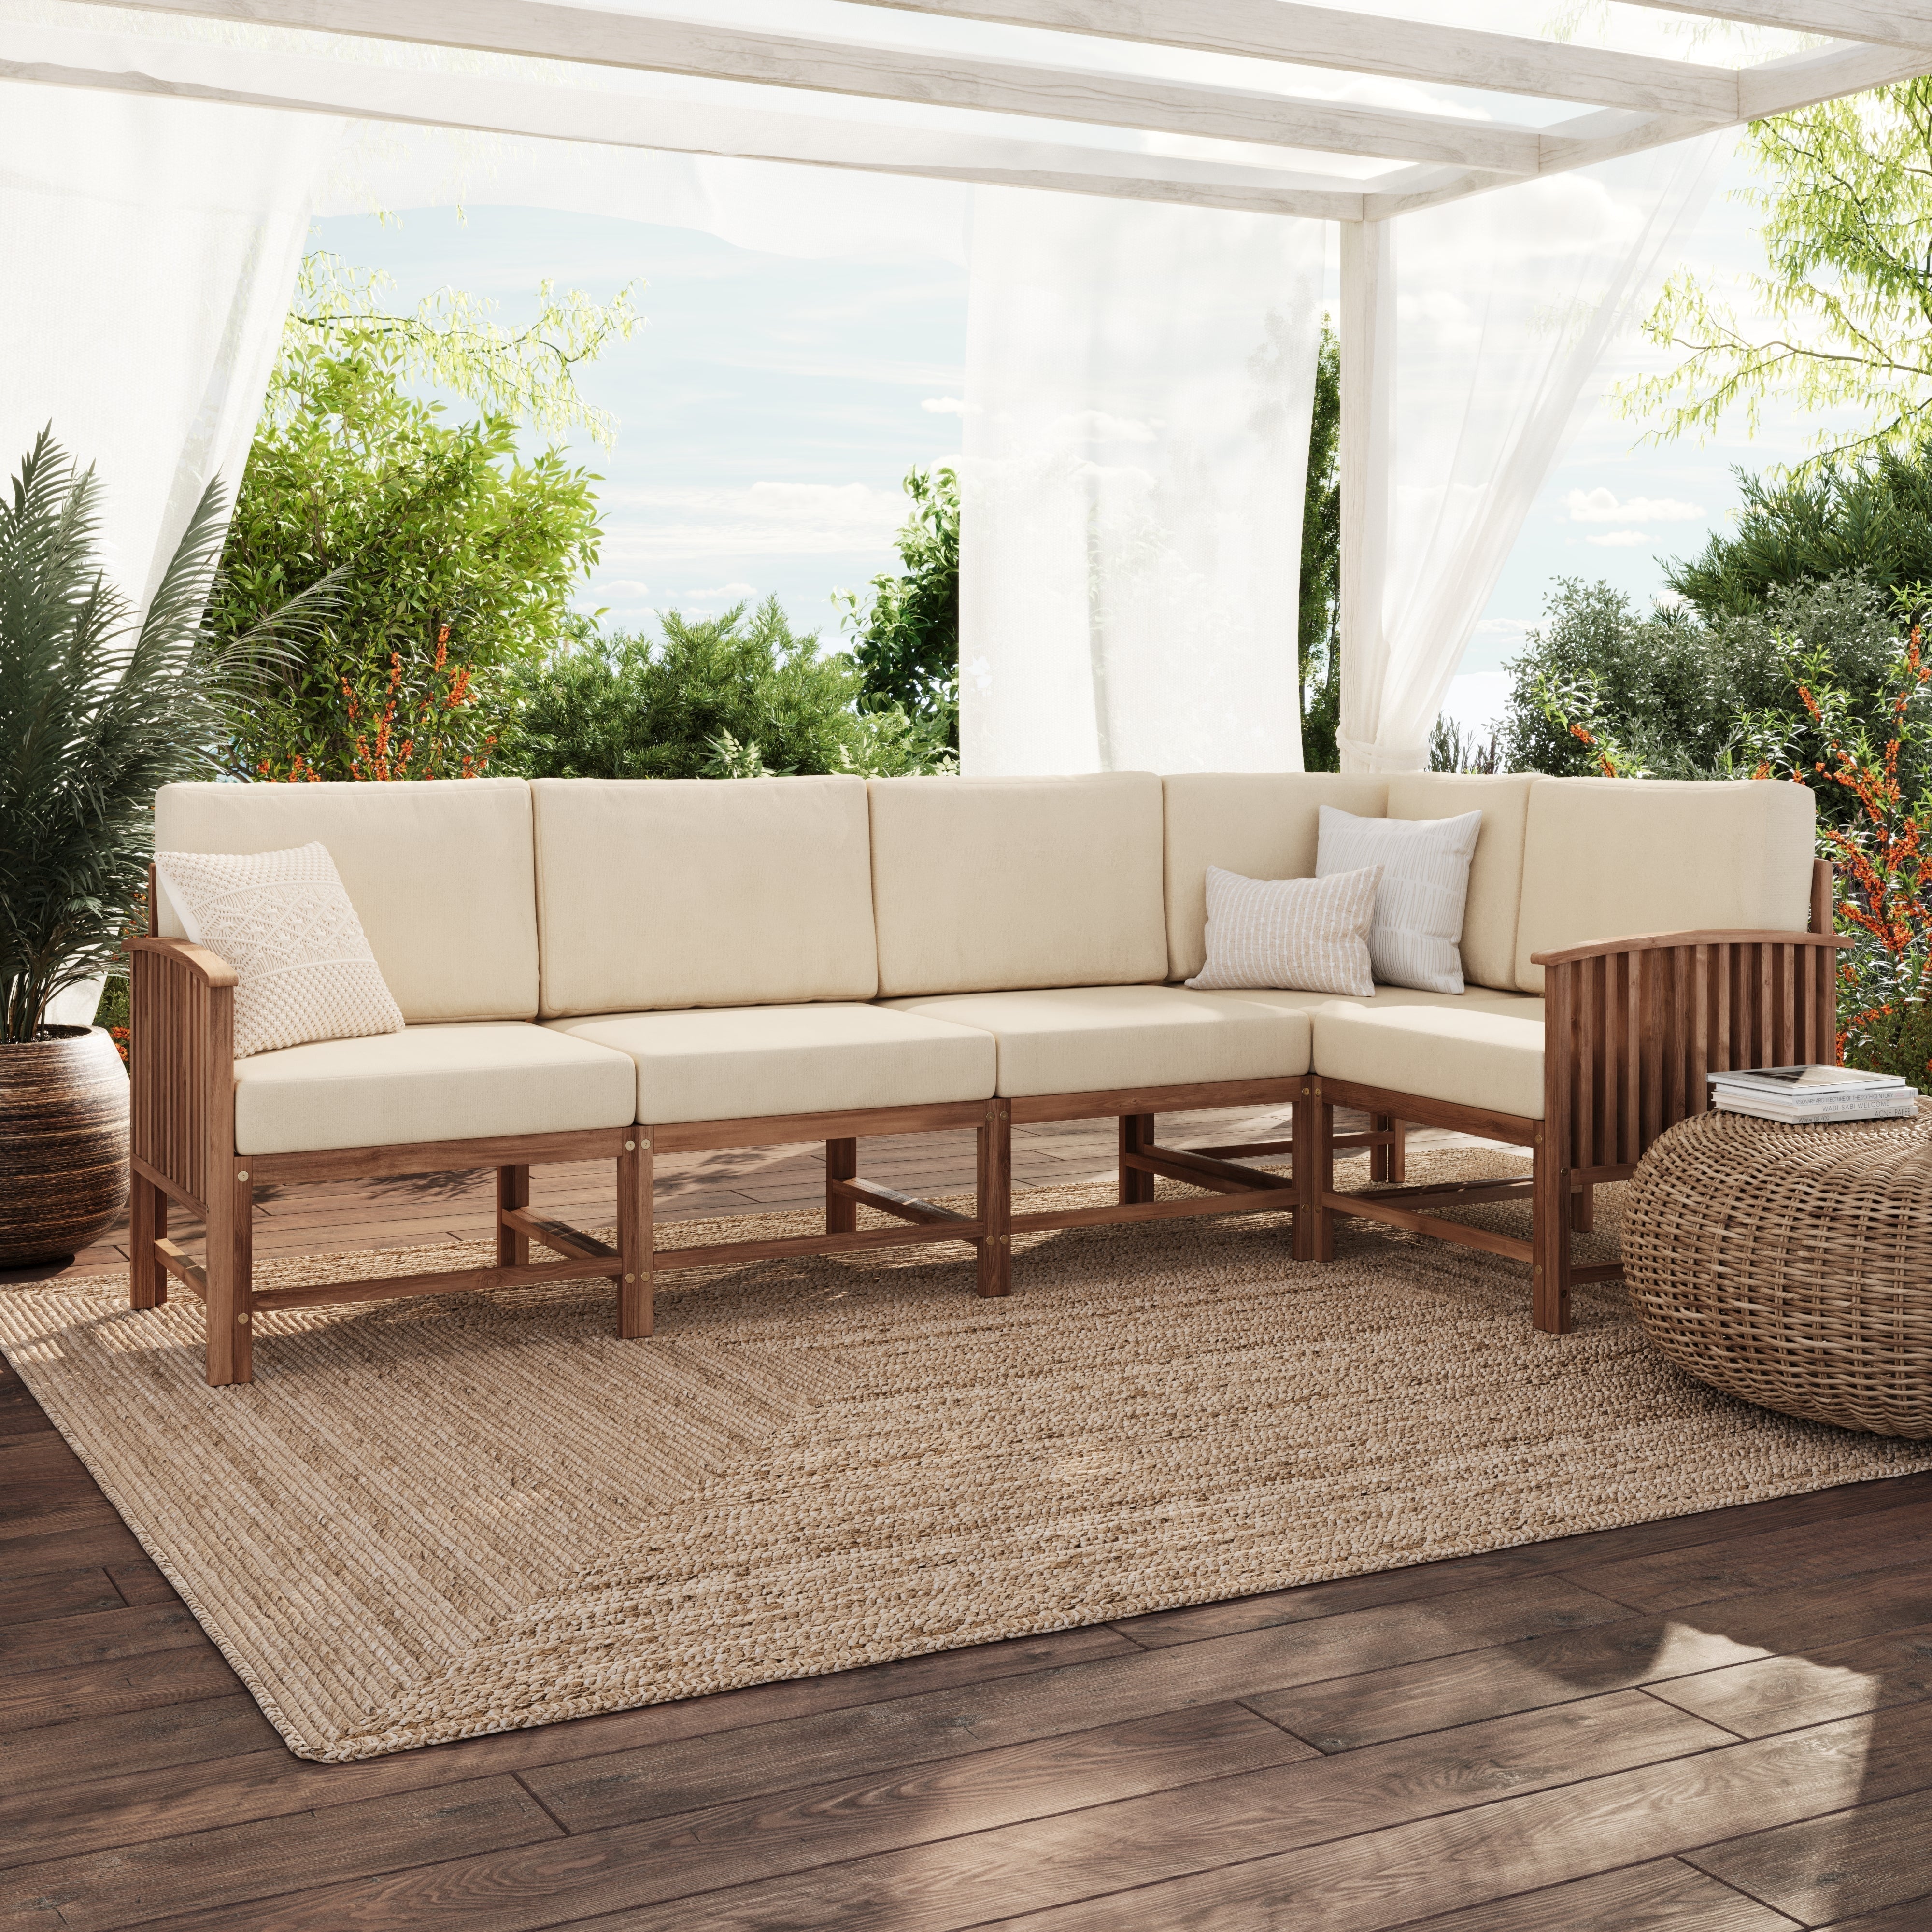 Midland Modern Solid Wood 5-Piece Outdoor Sectional Set